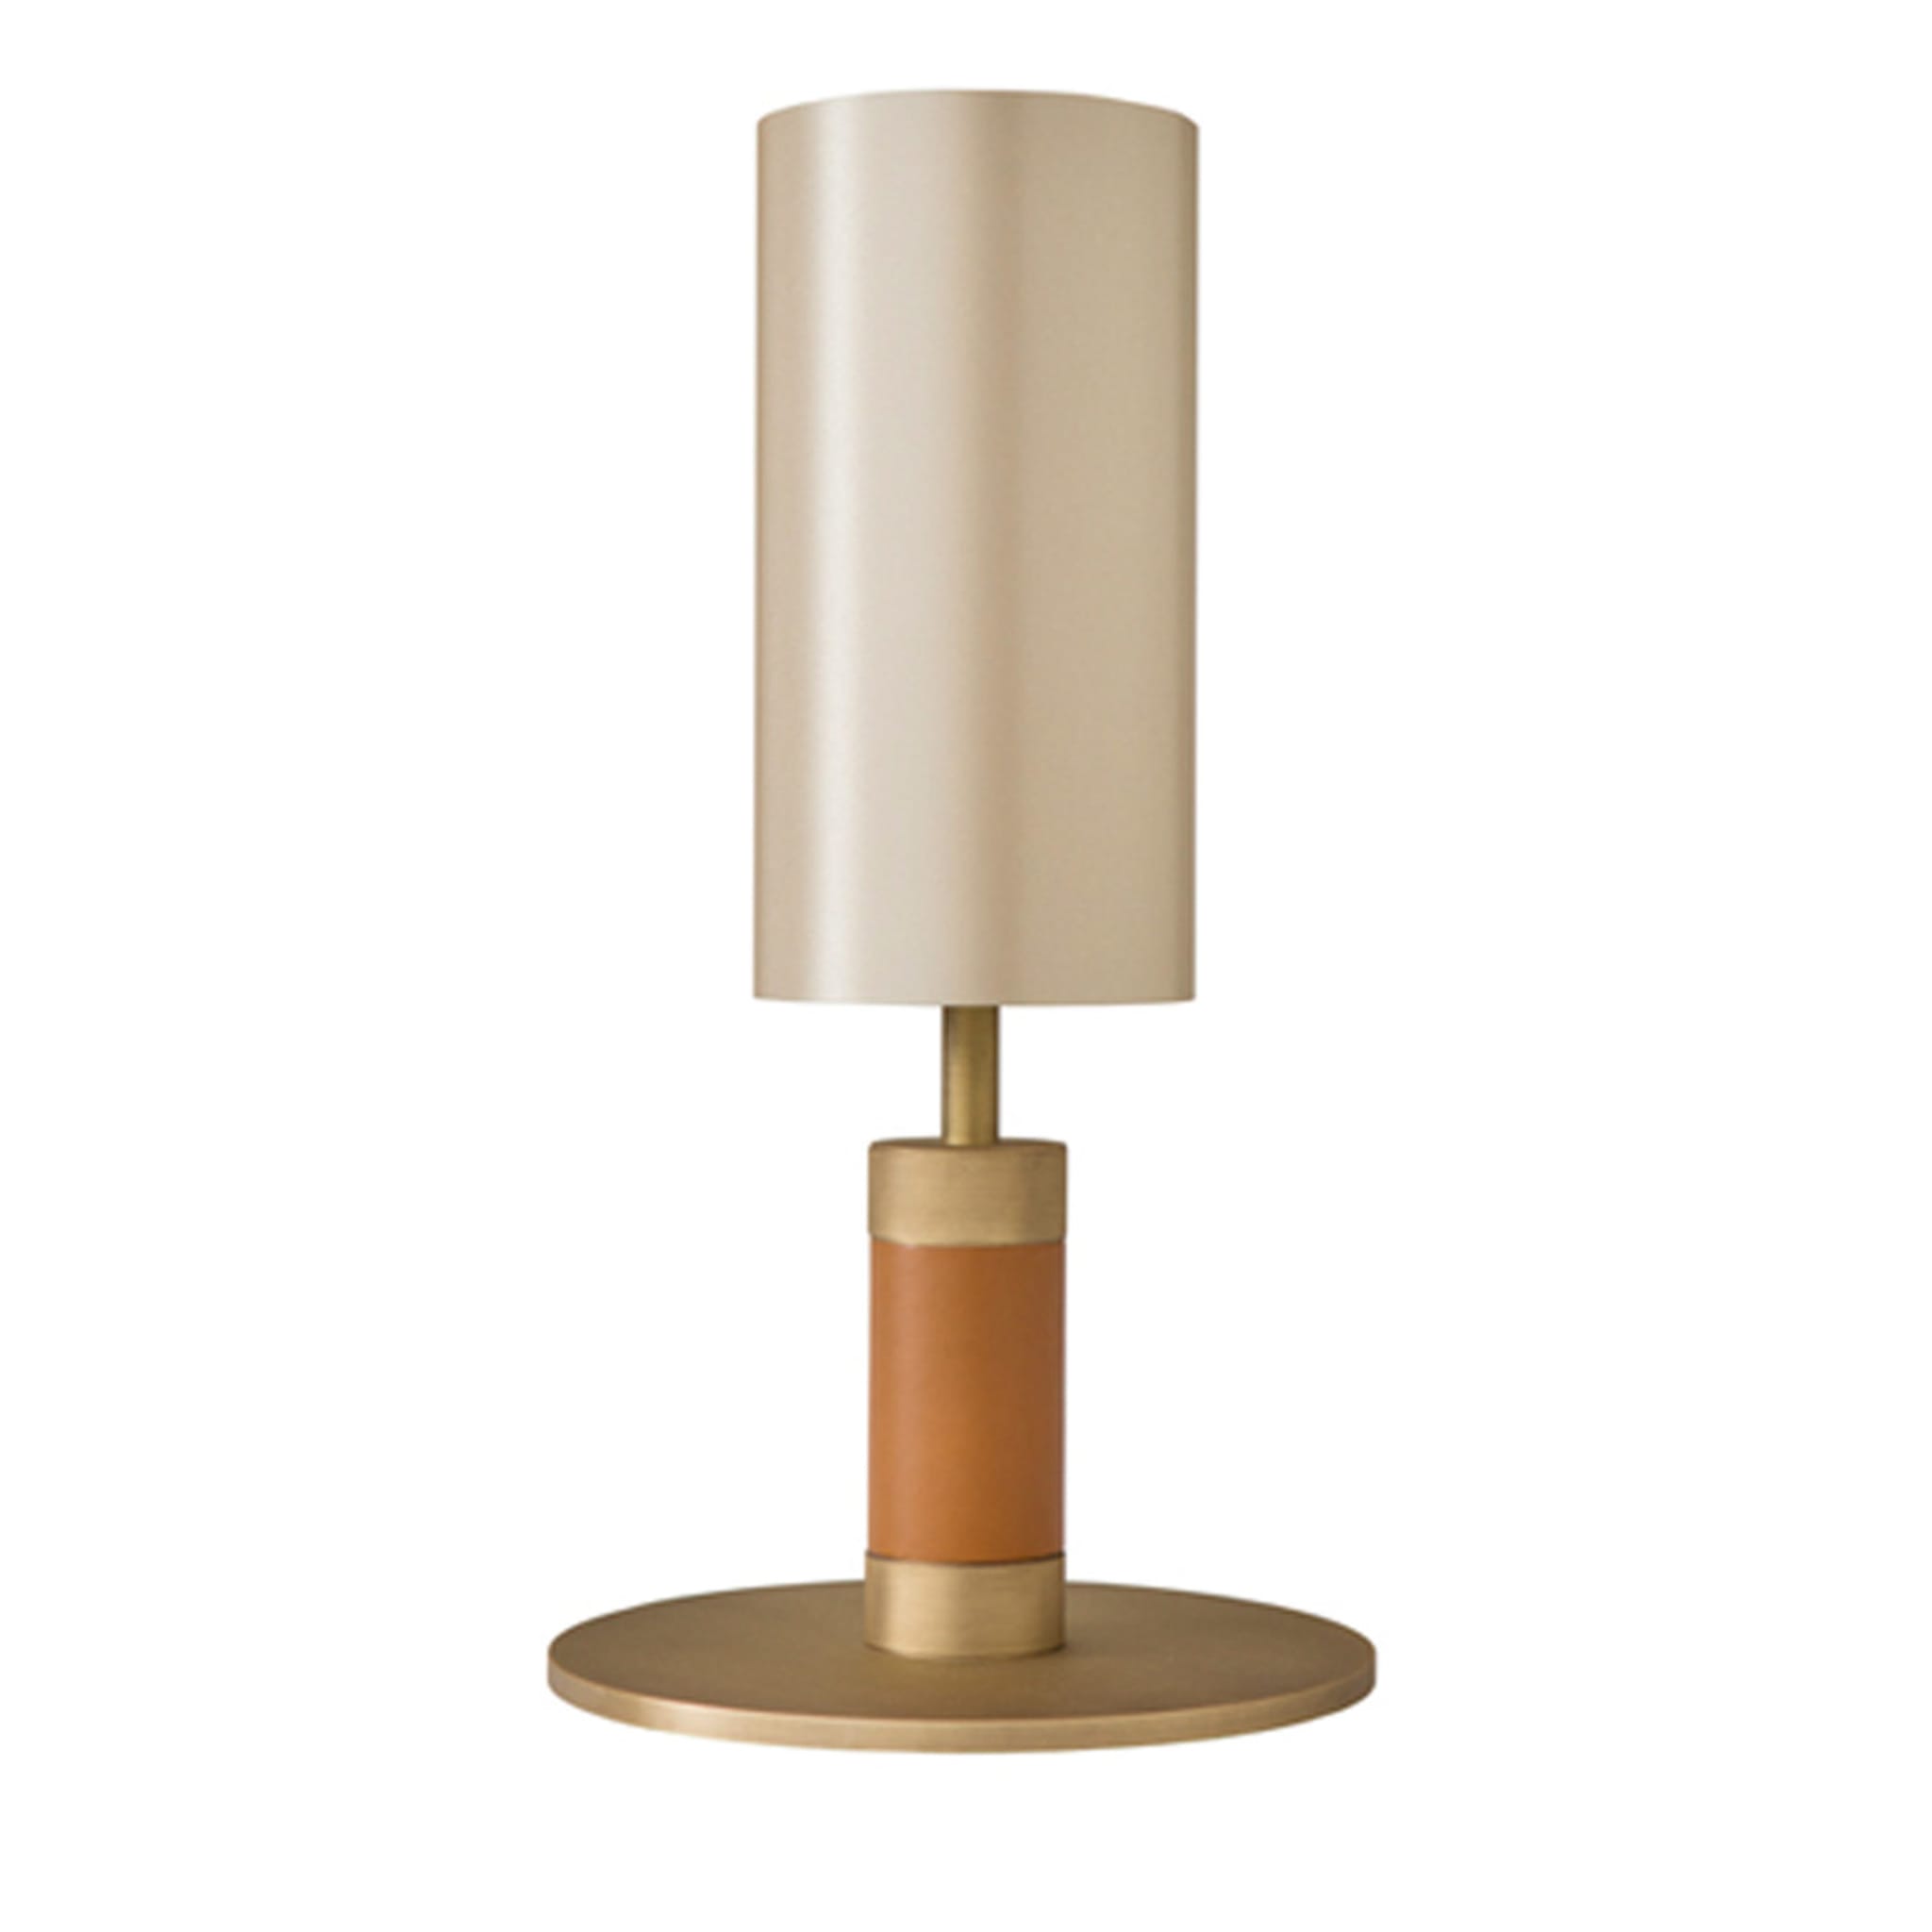 1.7 Bedside Table Lamp - Main view